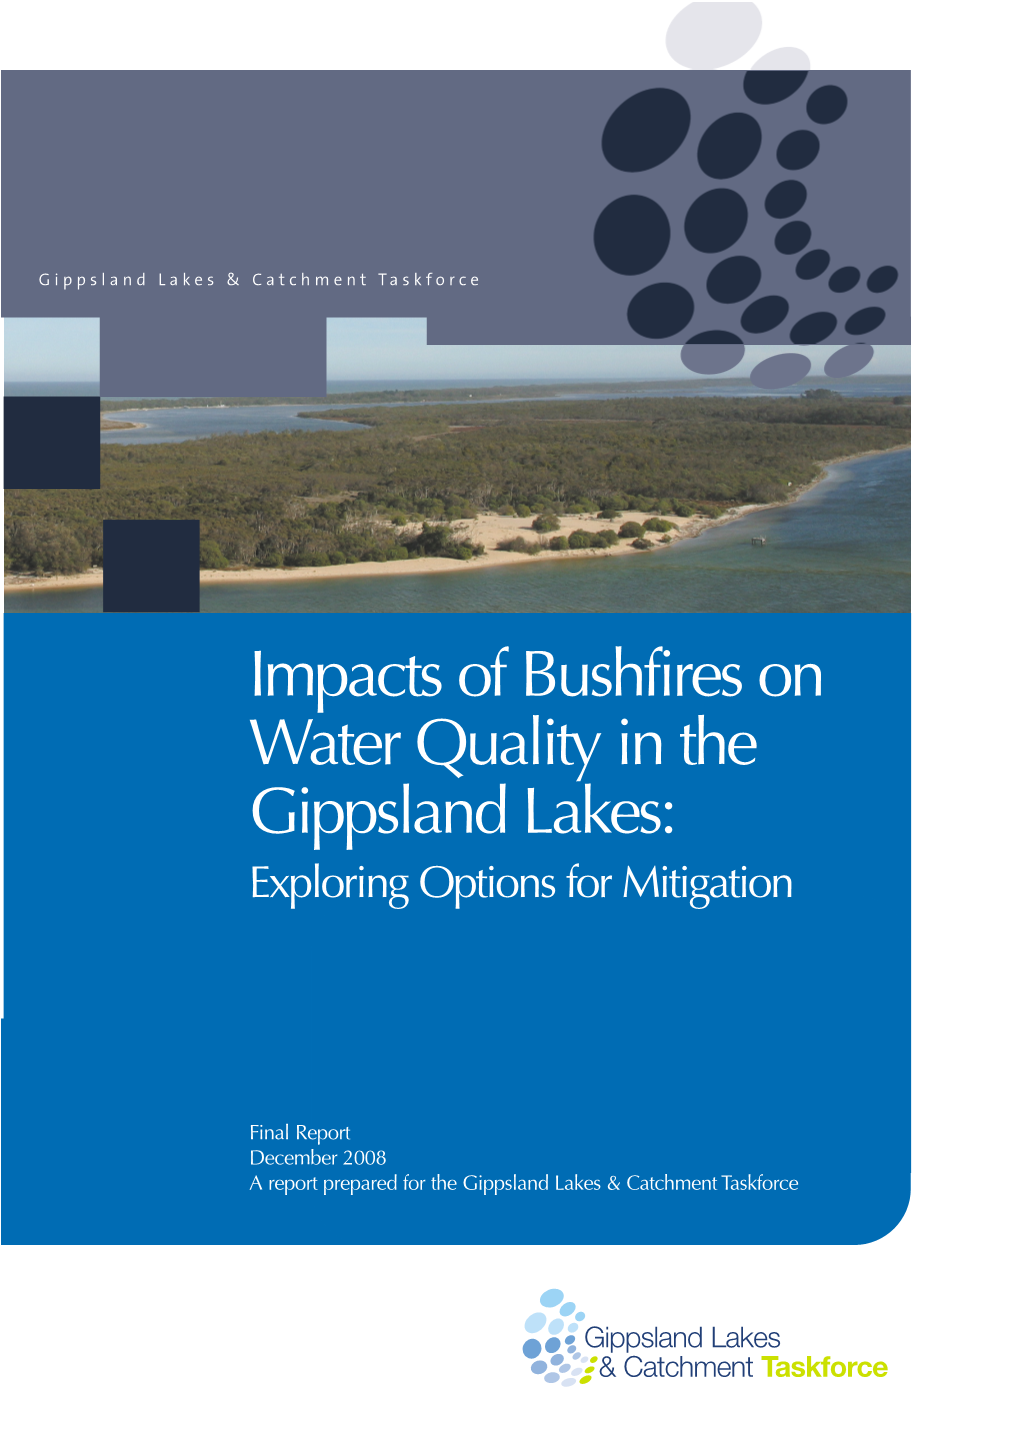 Impacts of Bushfires on Water Quality in the Gippsland Lakes: Exploring Options for Mitigation